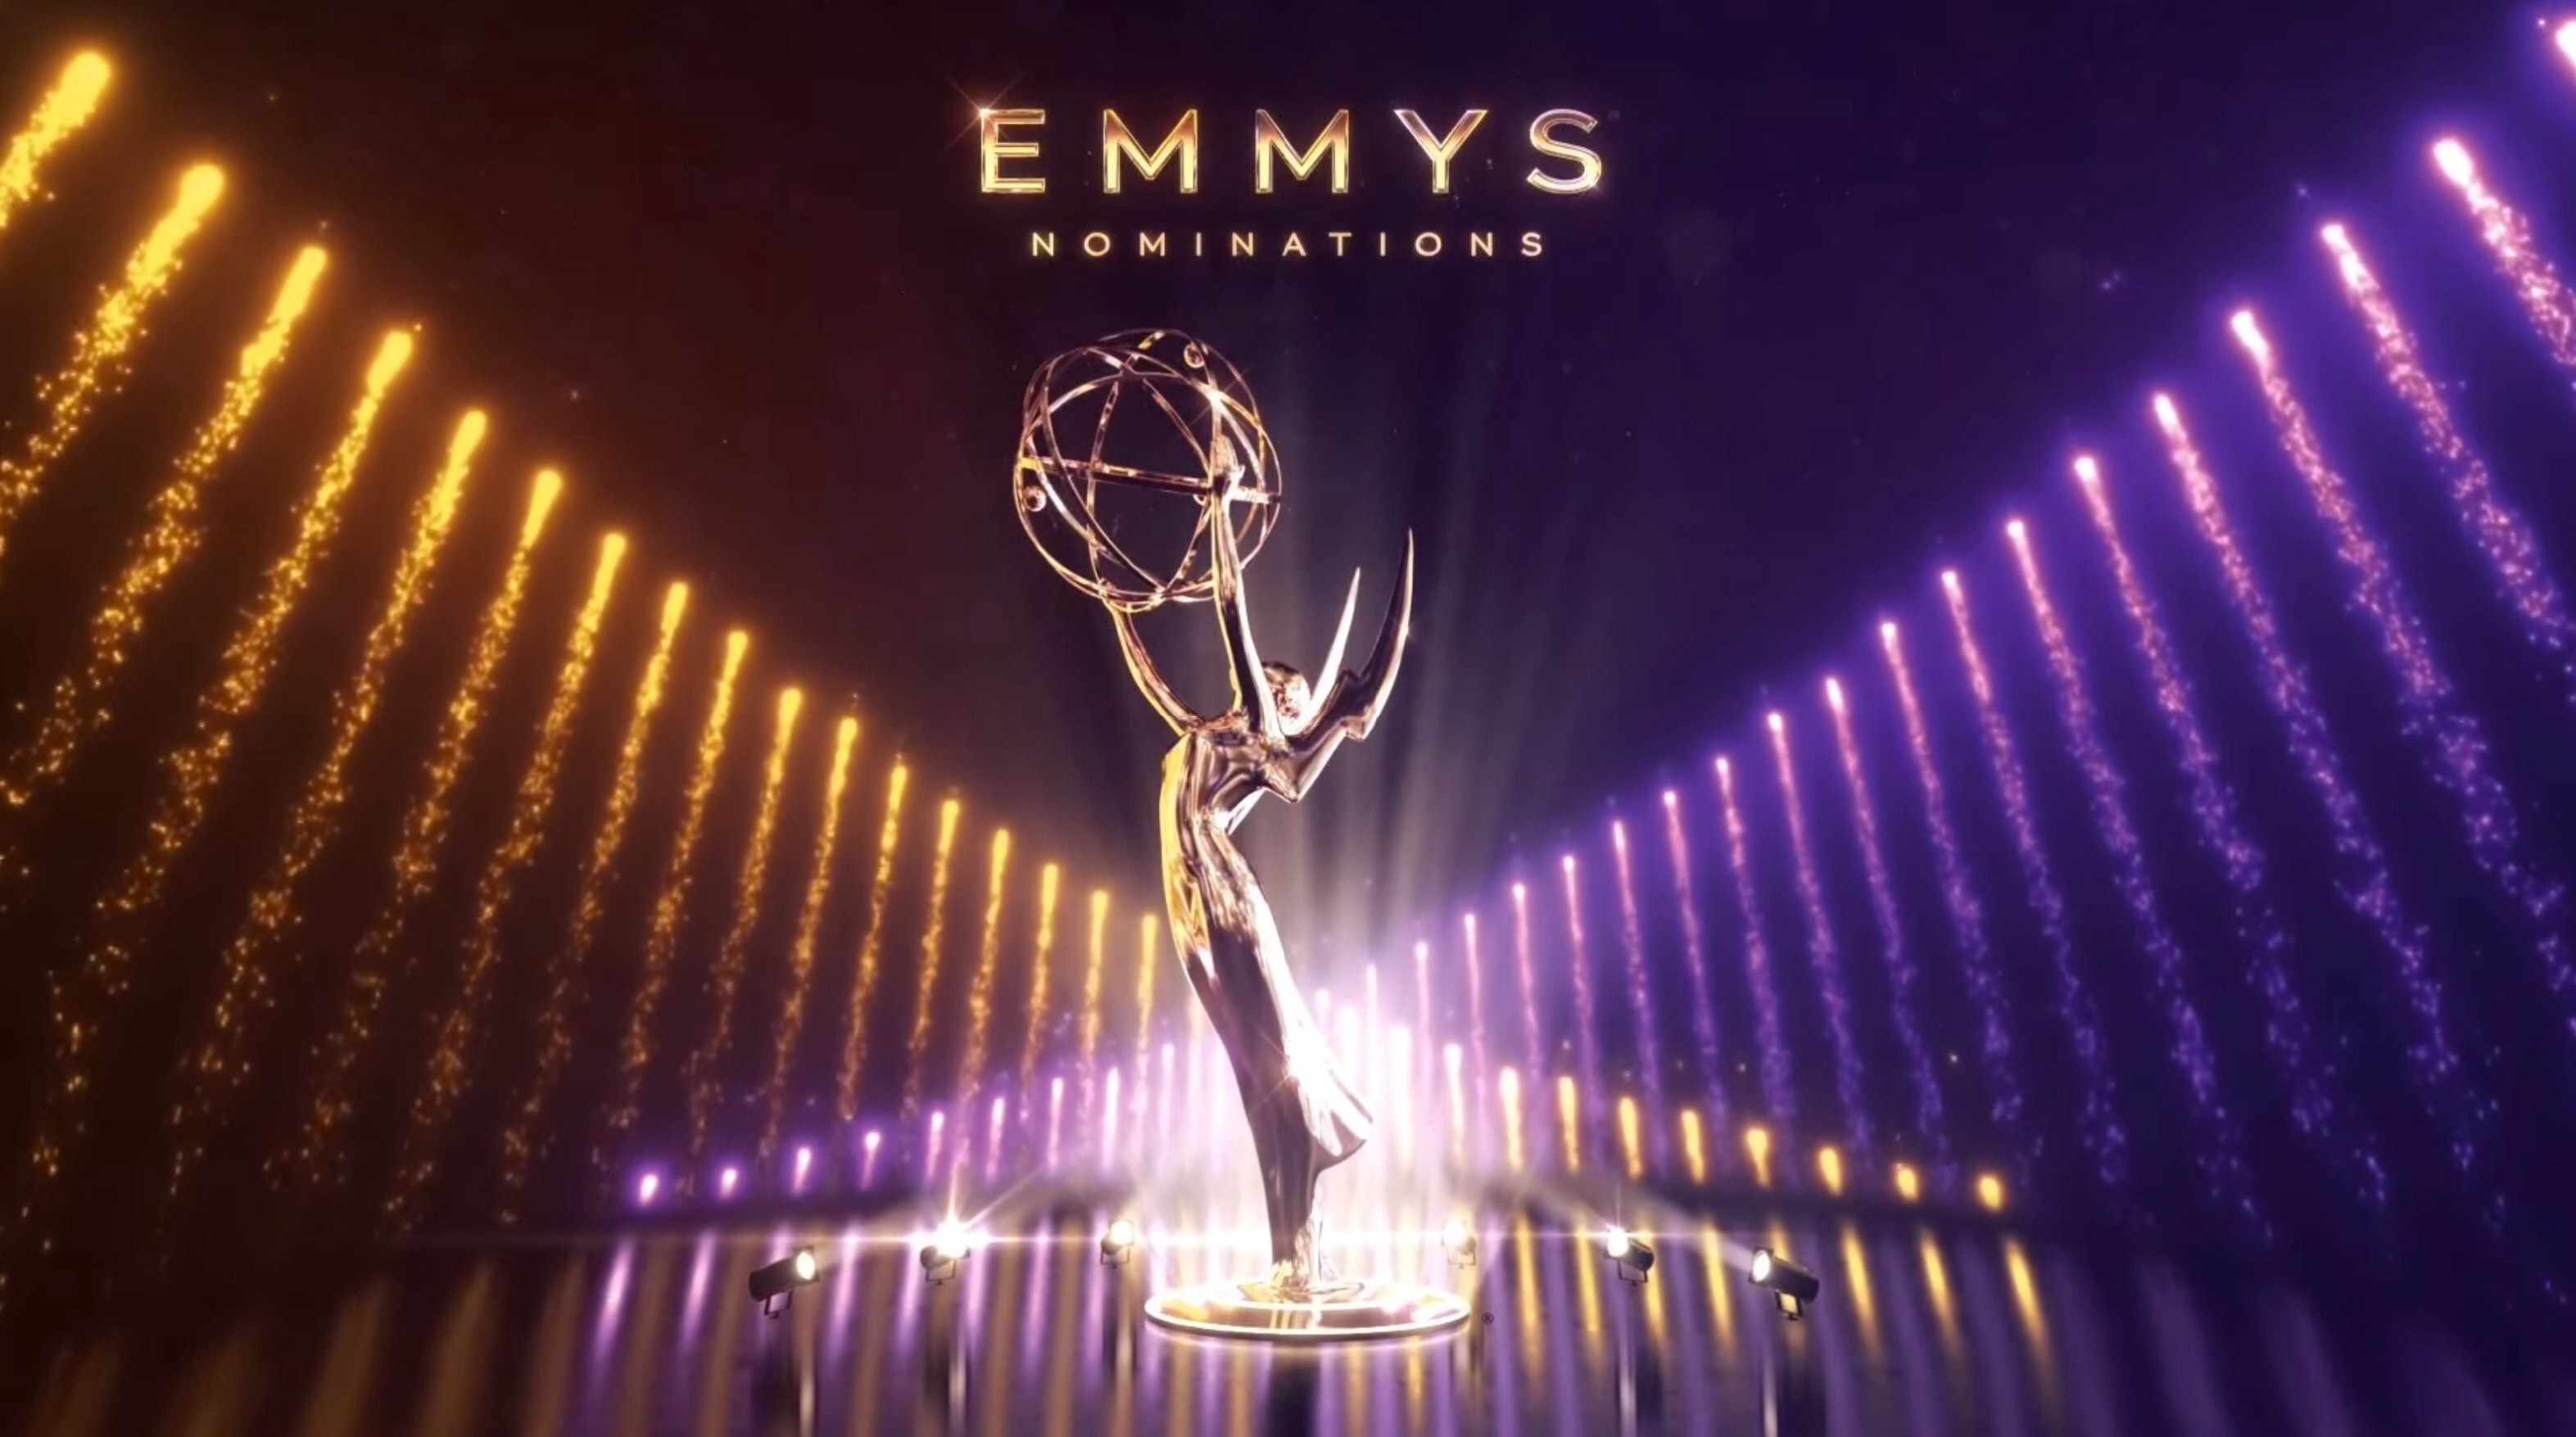 Promotional image for the 71st Annual Primetime Emmy Awards